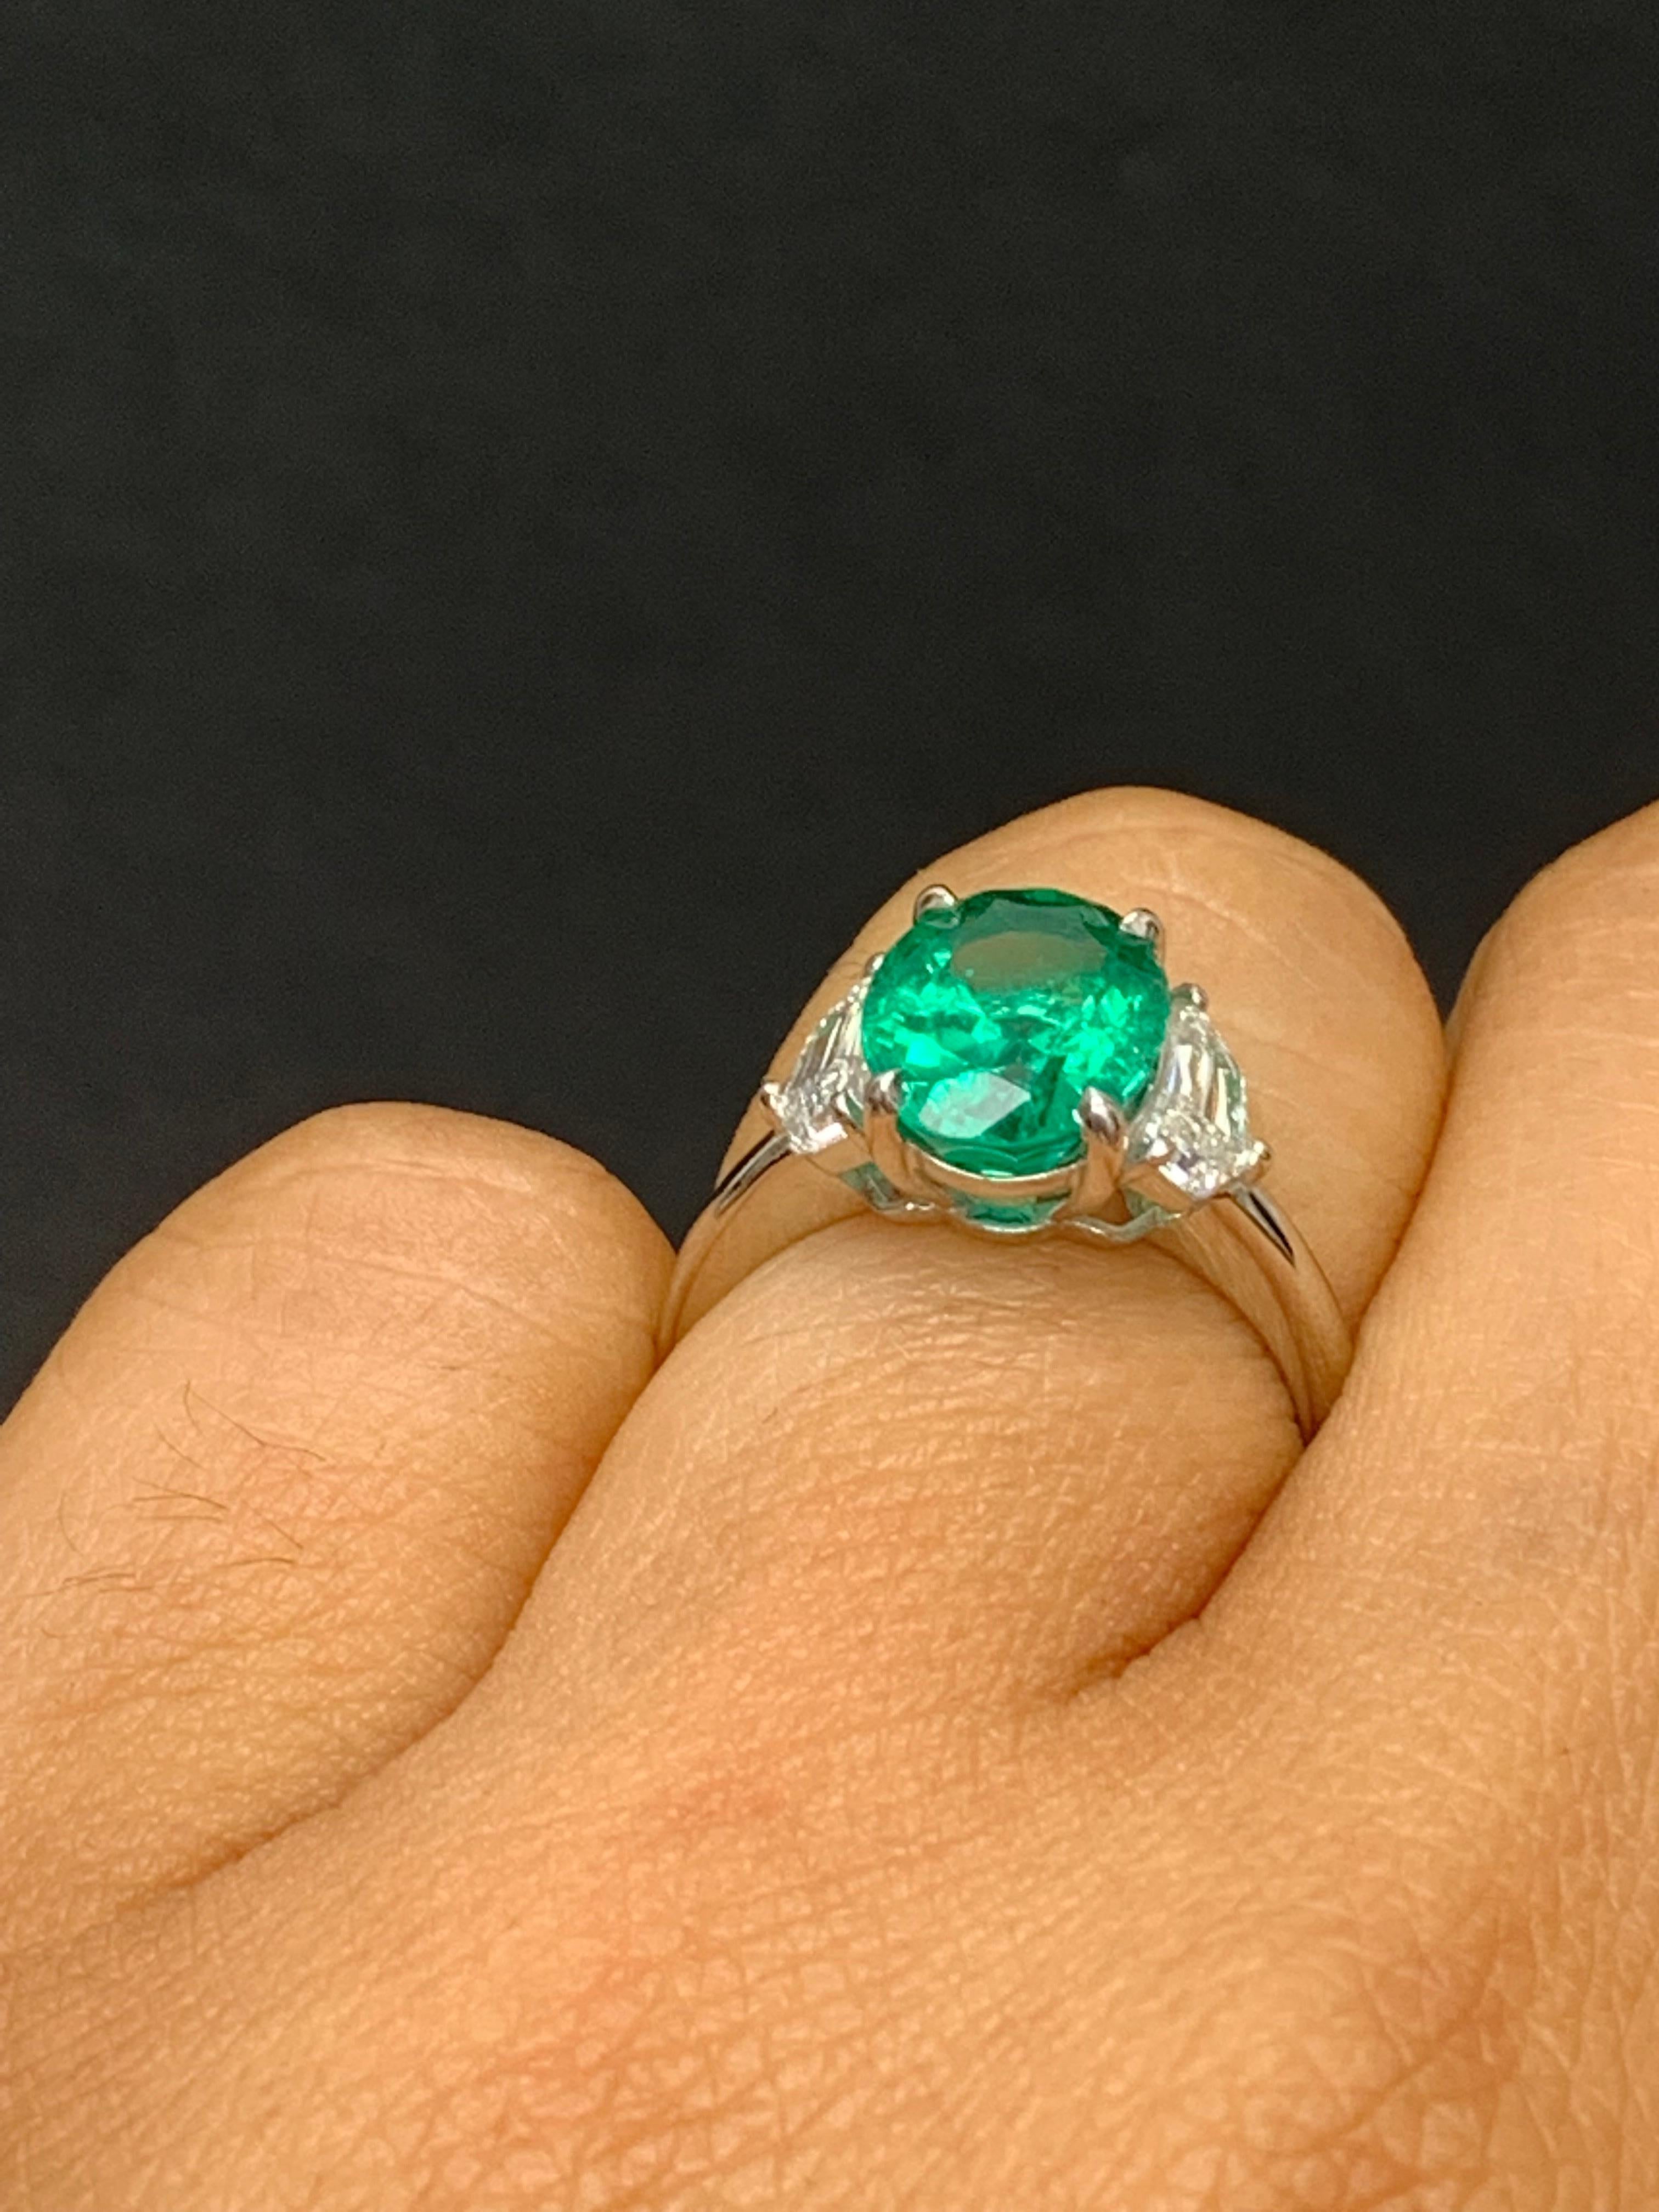 Women's Certified 2.72 Carat Oval Cut Emerald Diamond Engagement Ring in Platinum For Sale